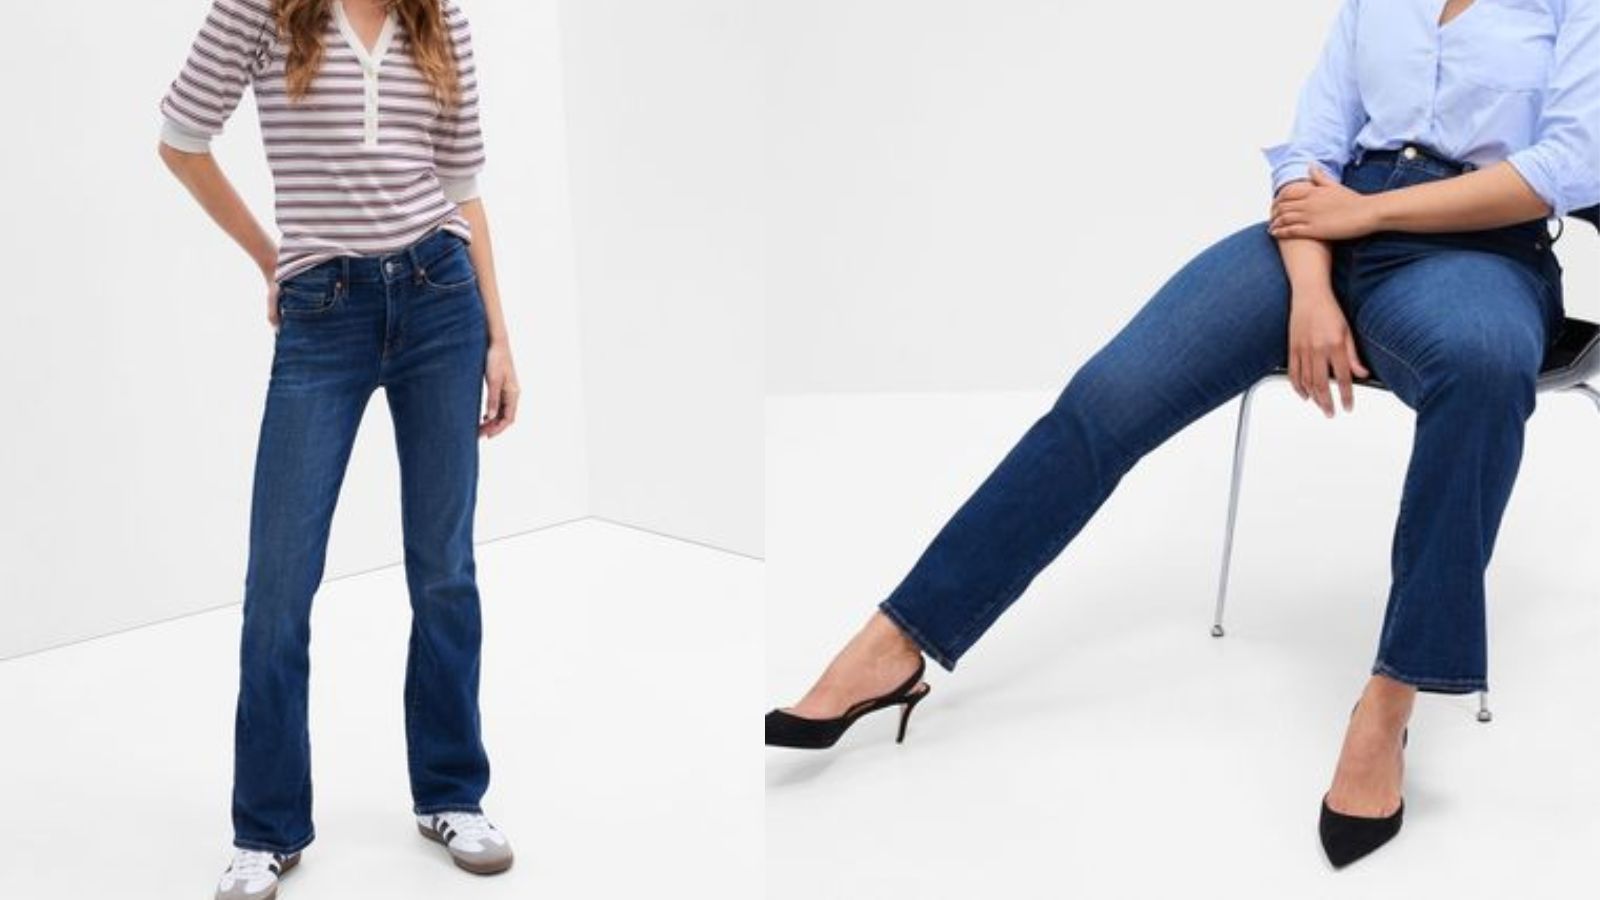 The best jeans for women over 60 according to style experts | Woman & Home